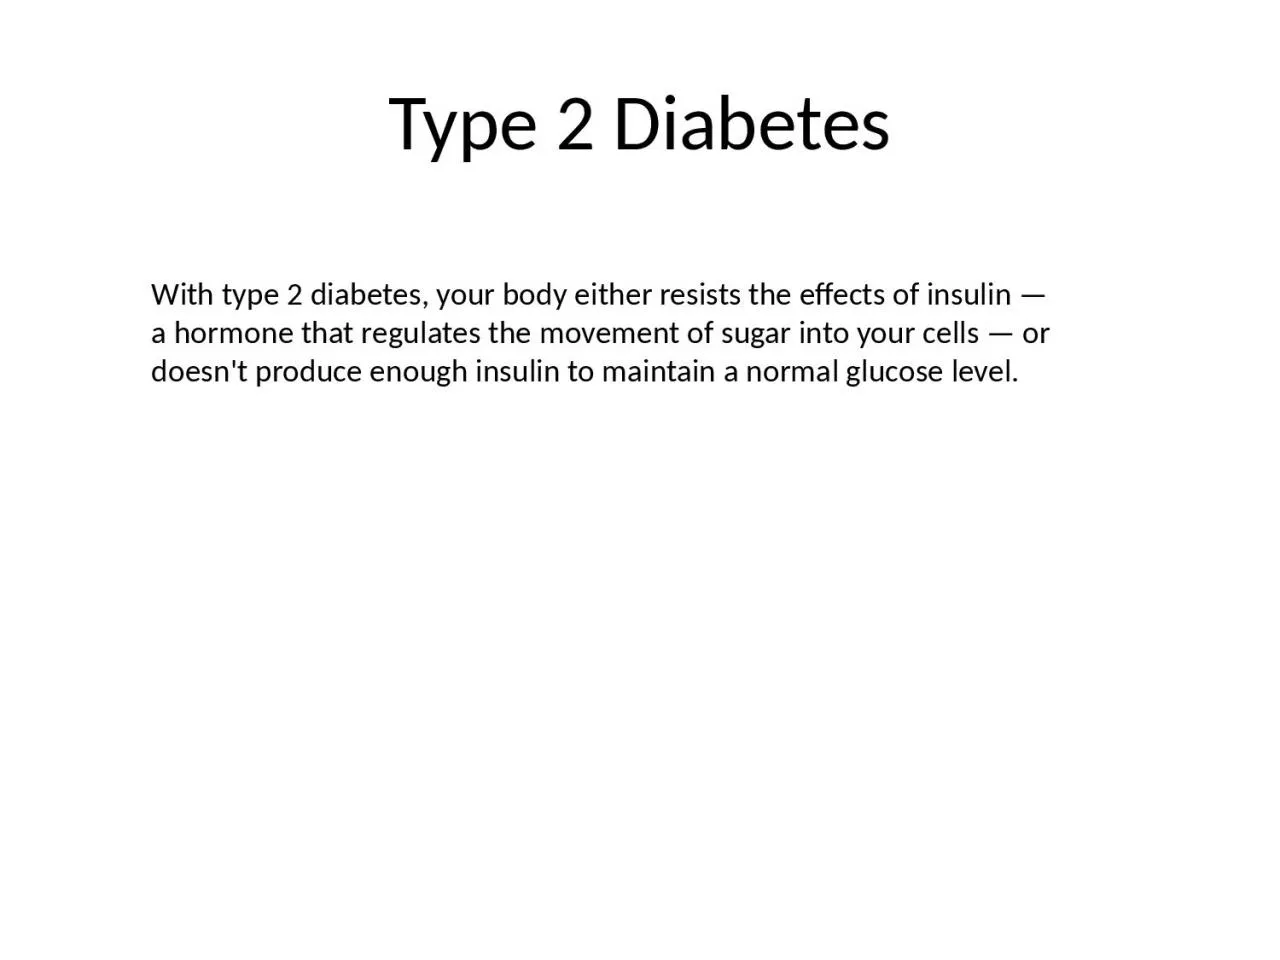 Type 2 Diabetes With type 2 diabetes, your body either resists the effects of insulin